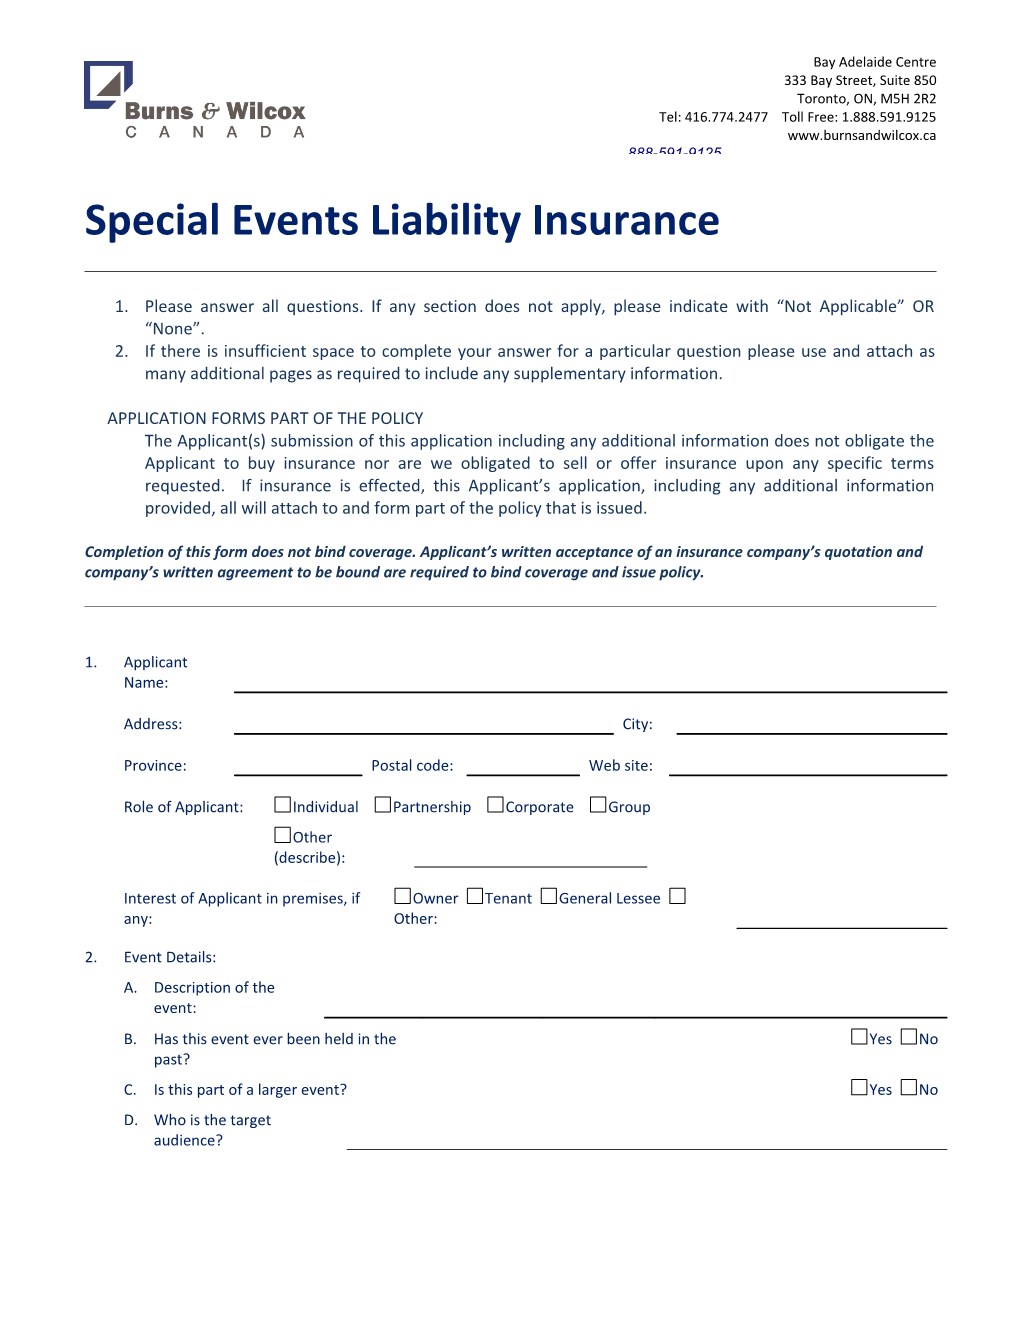 Special Events Liability Insurance